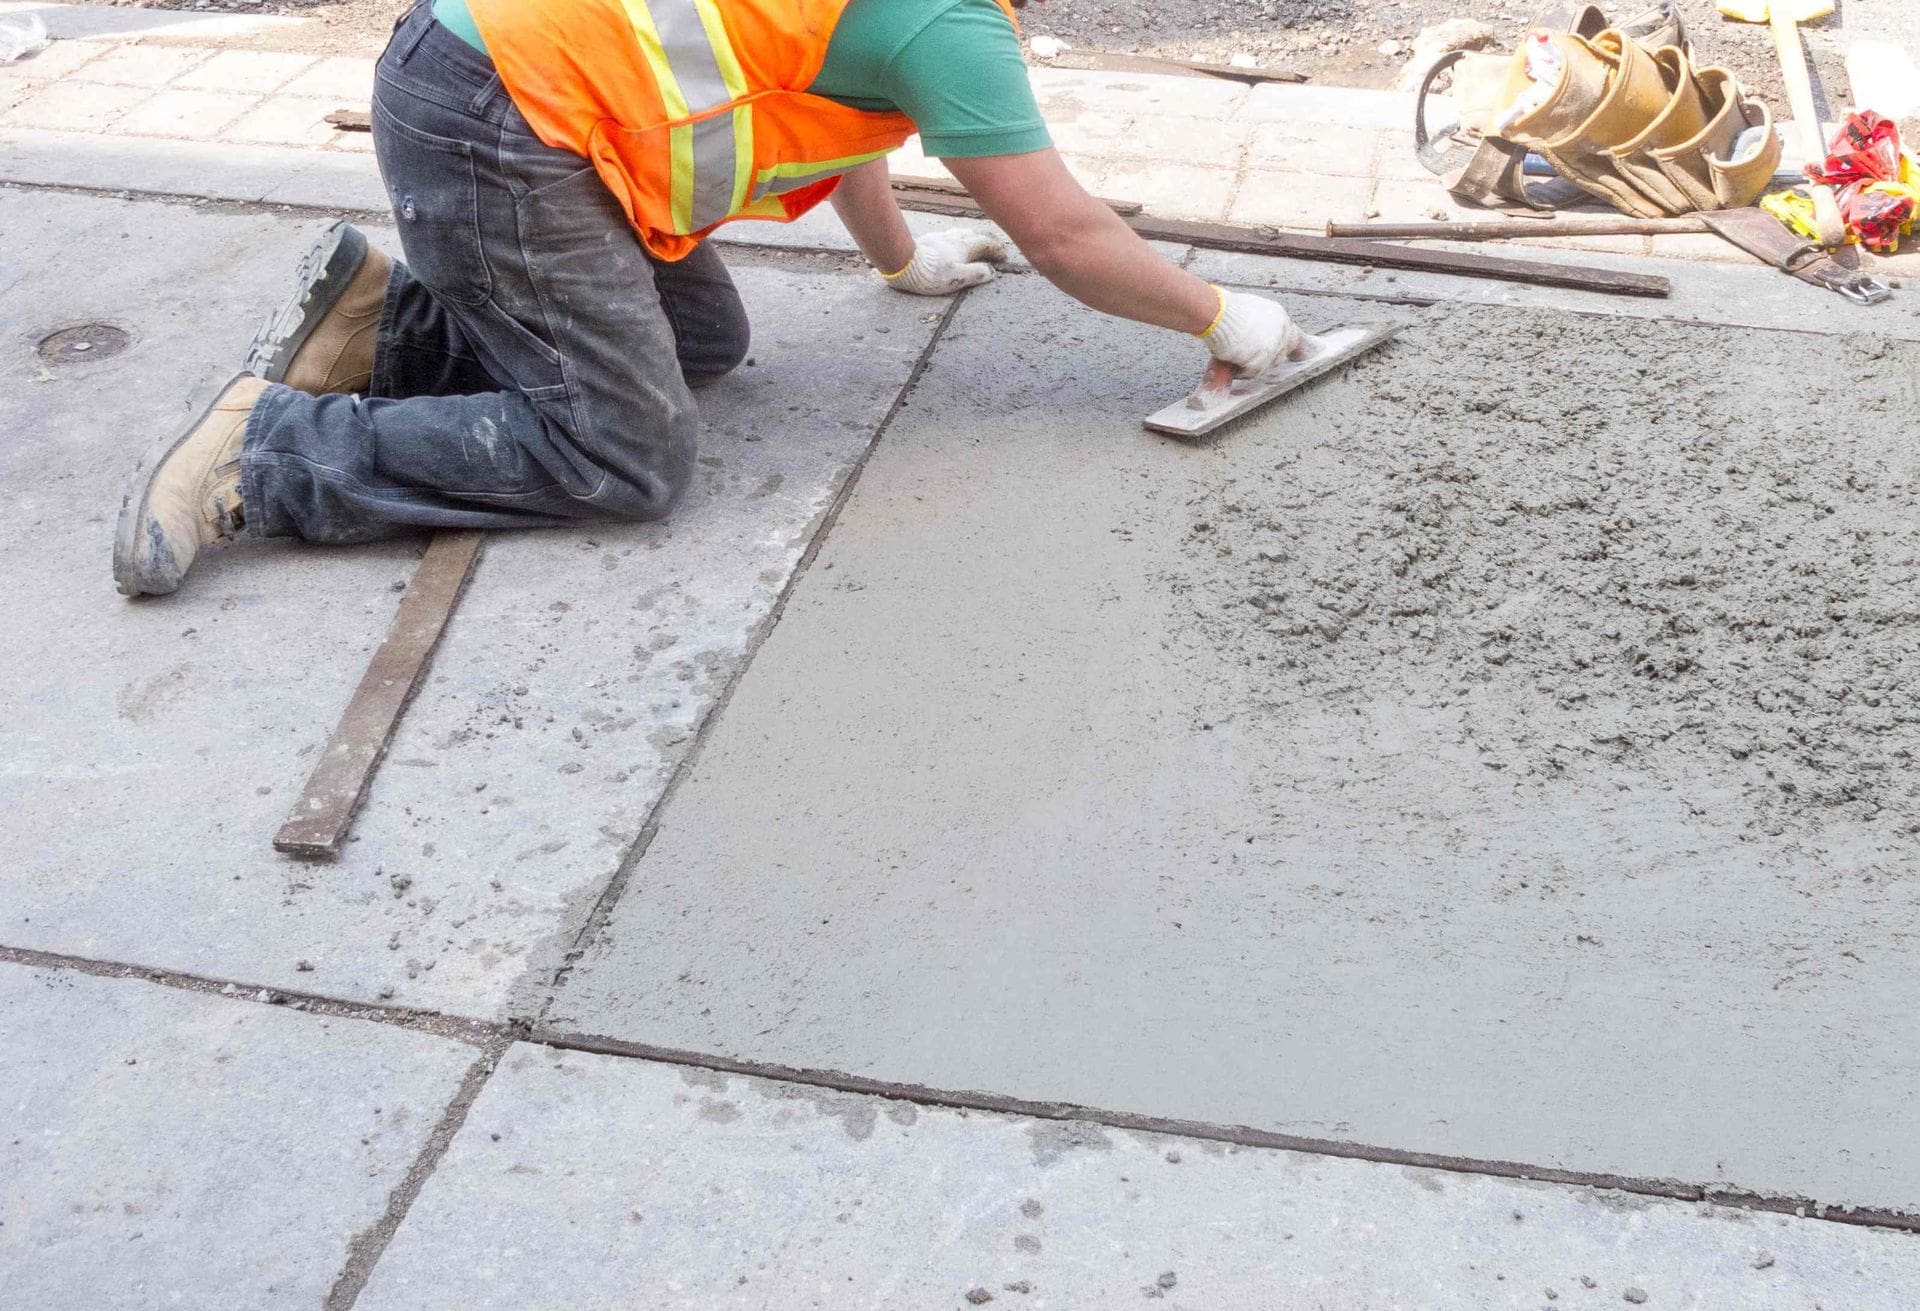 A construction worker wearing an orange safety vest and kneeling on the ground smooths wet concrete on a Sun City sidewalk with a trowel. Wooden planks outline the area being worked on, and West Valley Concrete materials are visible in the background.